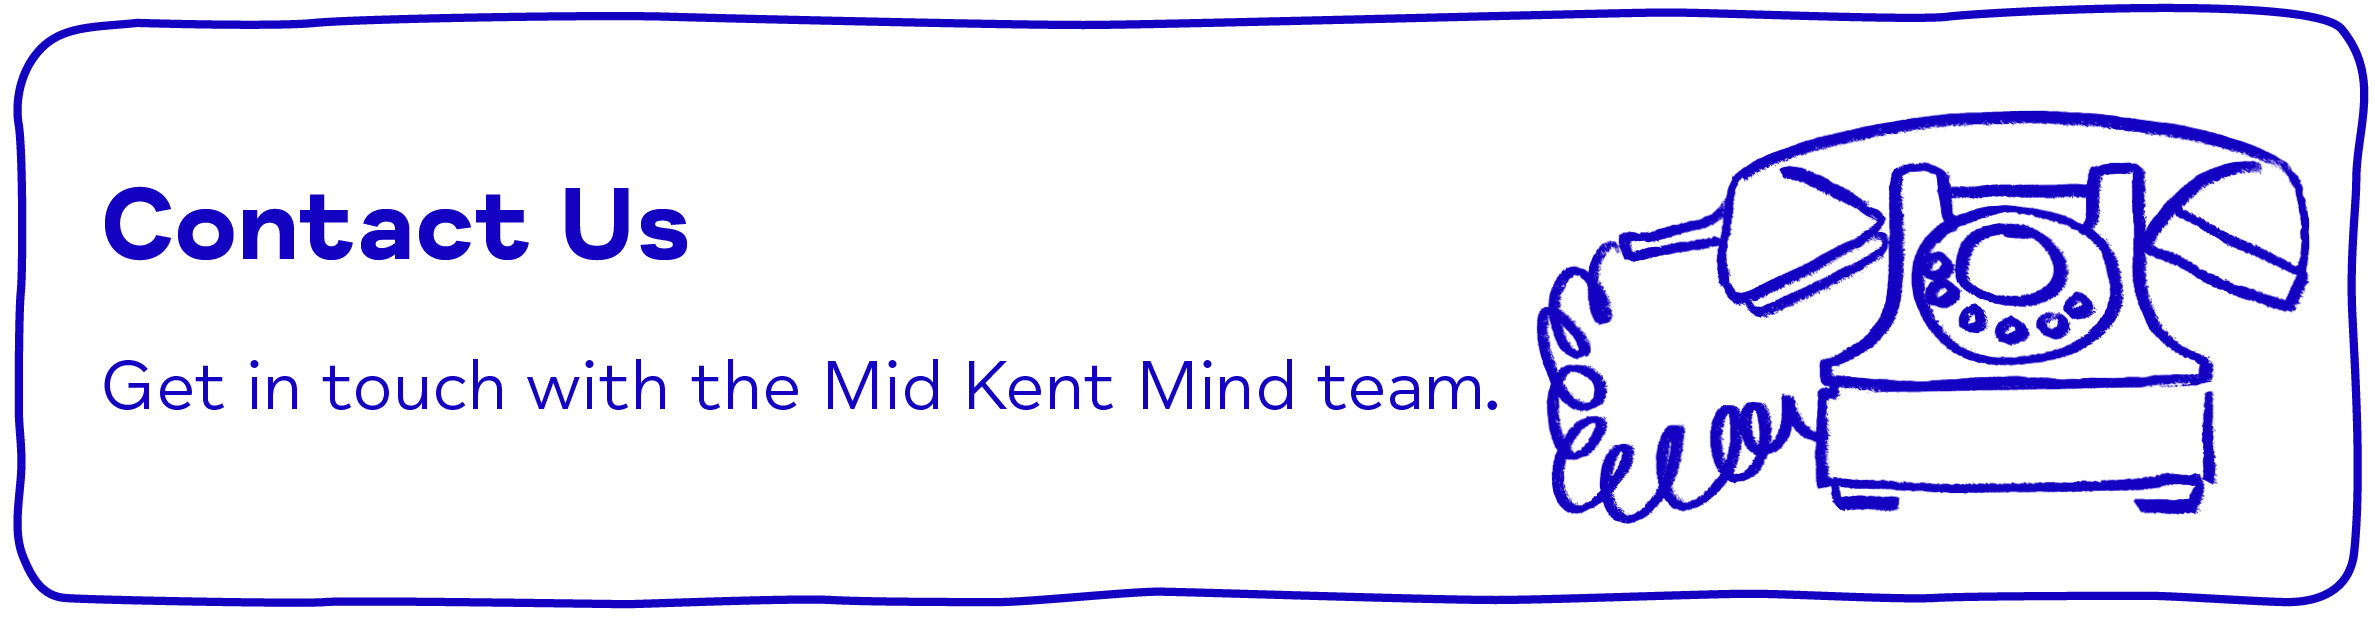 Contact Us - Get in touch with the Mid Kent Mind team